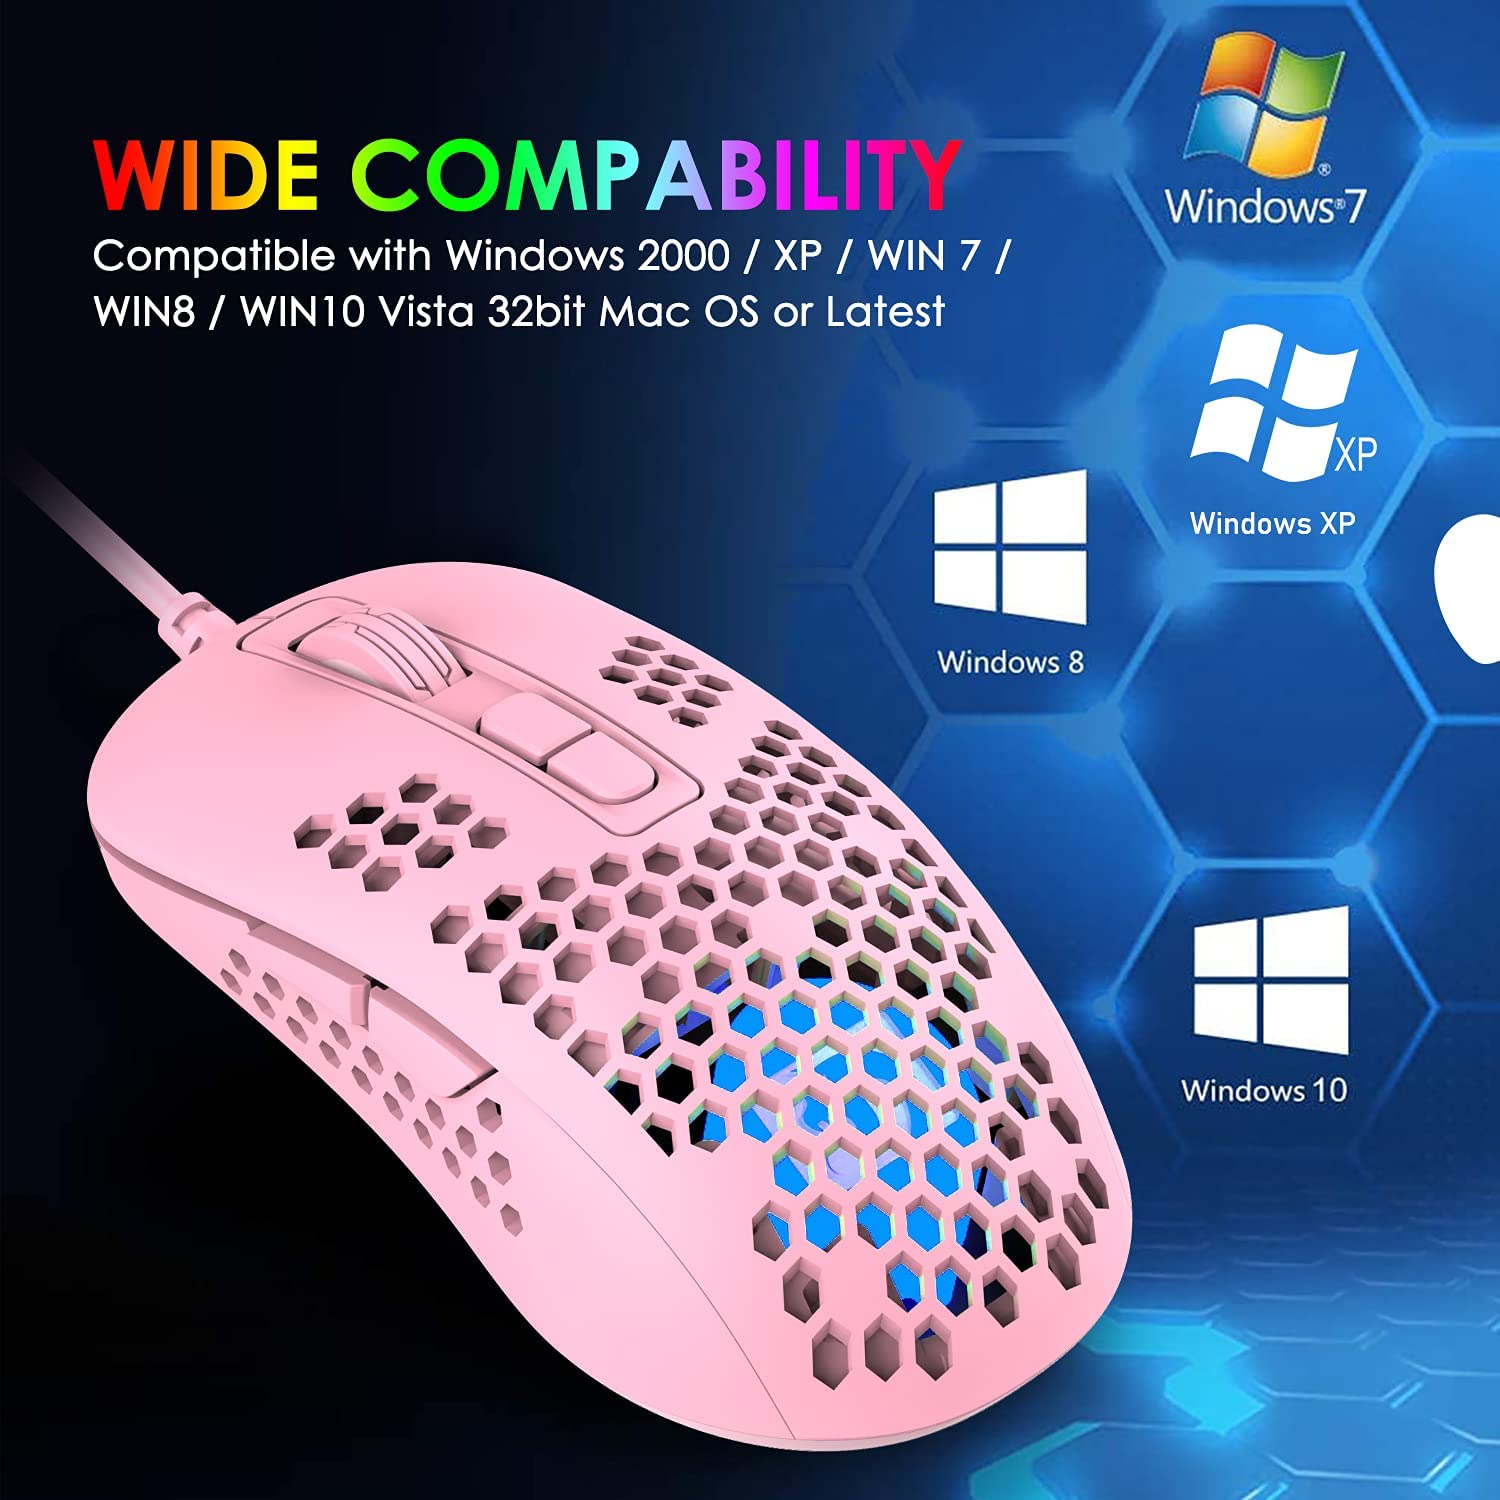 MAMBASNAKE 383 Lightweight Wired Mouse, USB Optical Computer Mice with RGB Backlit, 4 Adjustable DPI Up to 2400, Honeycomb Shell